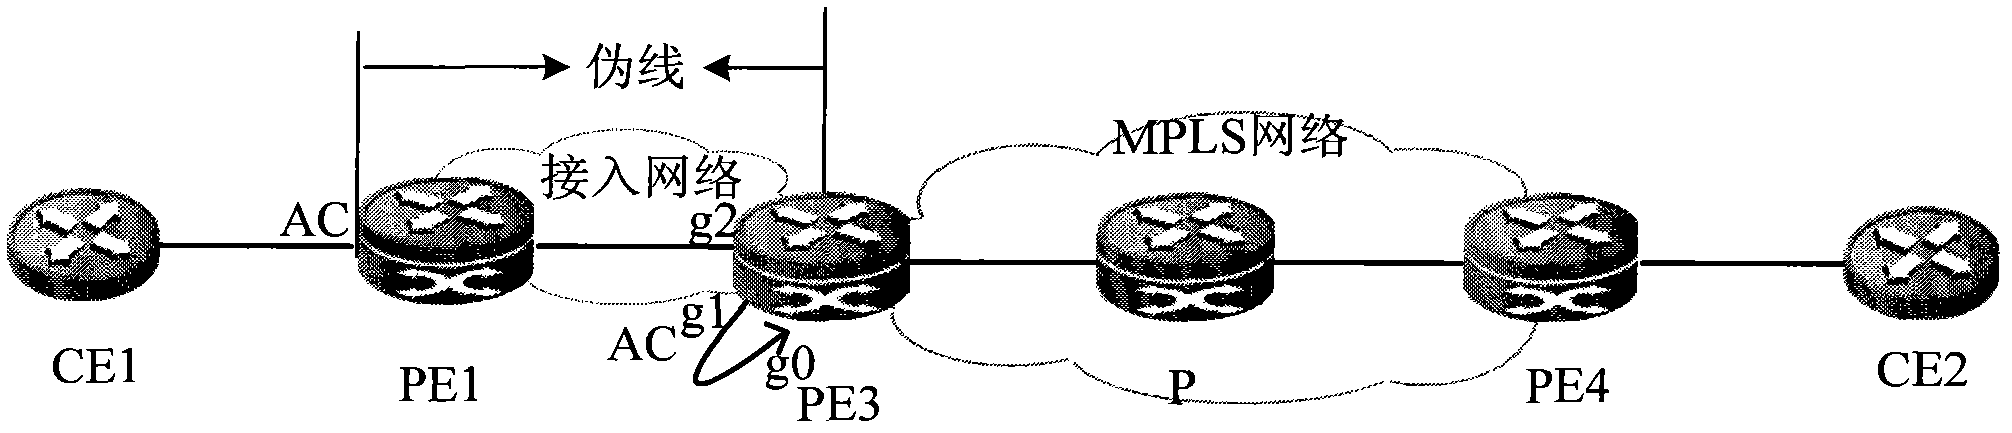 Method for extending MPLS VPN access through public network and PE equipment